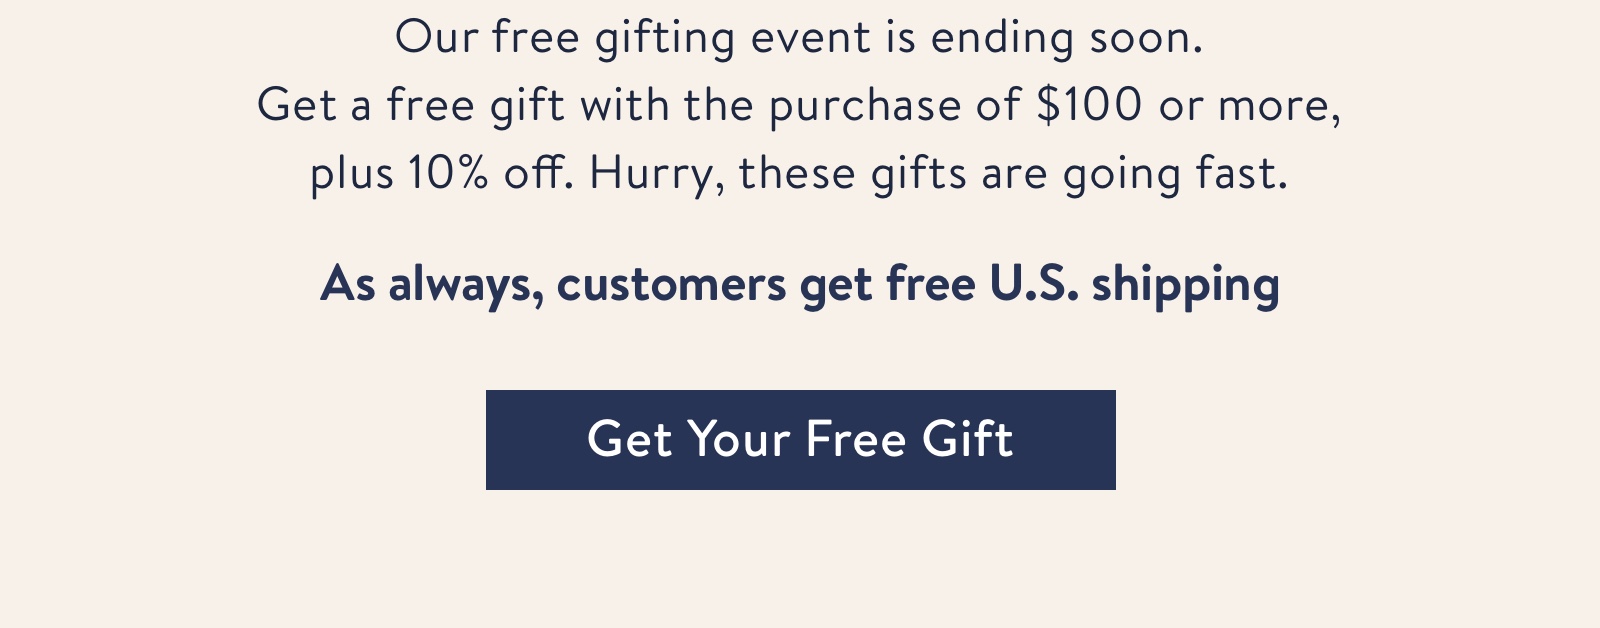 Our free gifting event is ending soon.?Get a free gift with the purchase of $100 or more, plus 10% off your order. Hurry, these gifts are going fast